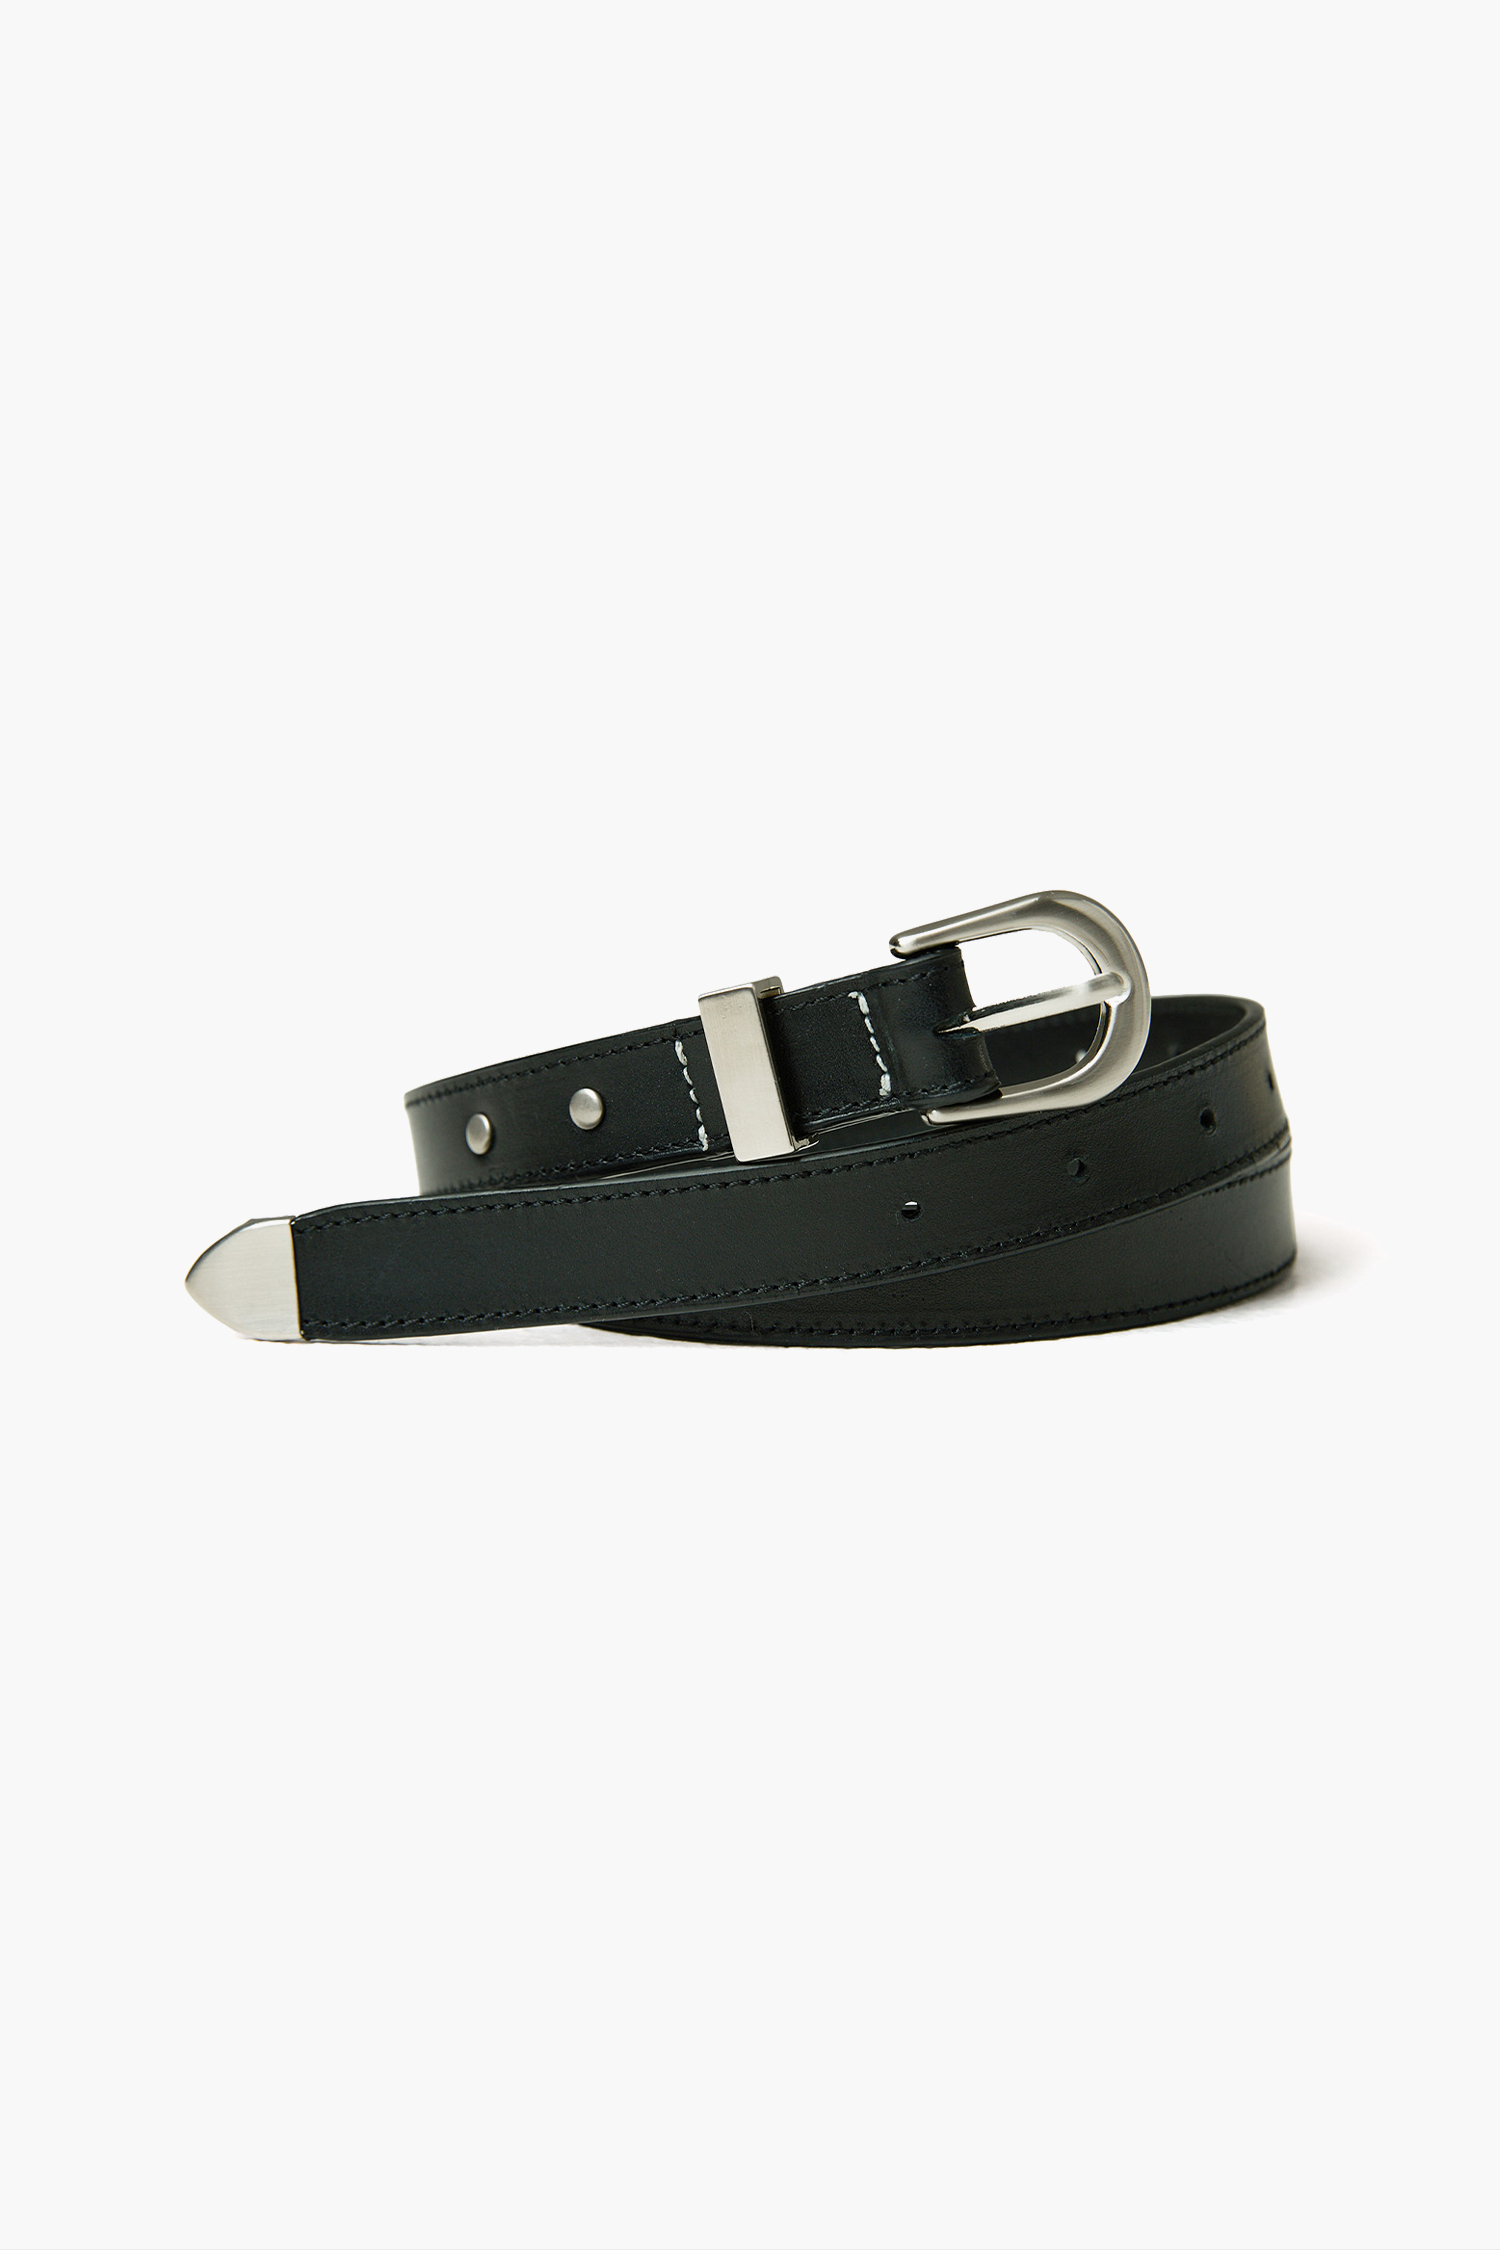 ROUND BUCKLE LEATHER BELT - SILVER